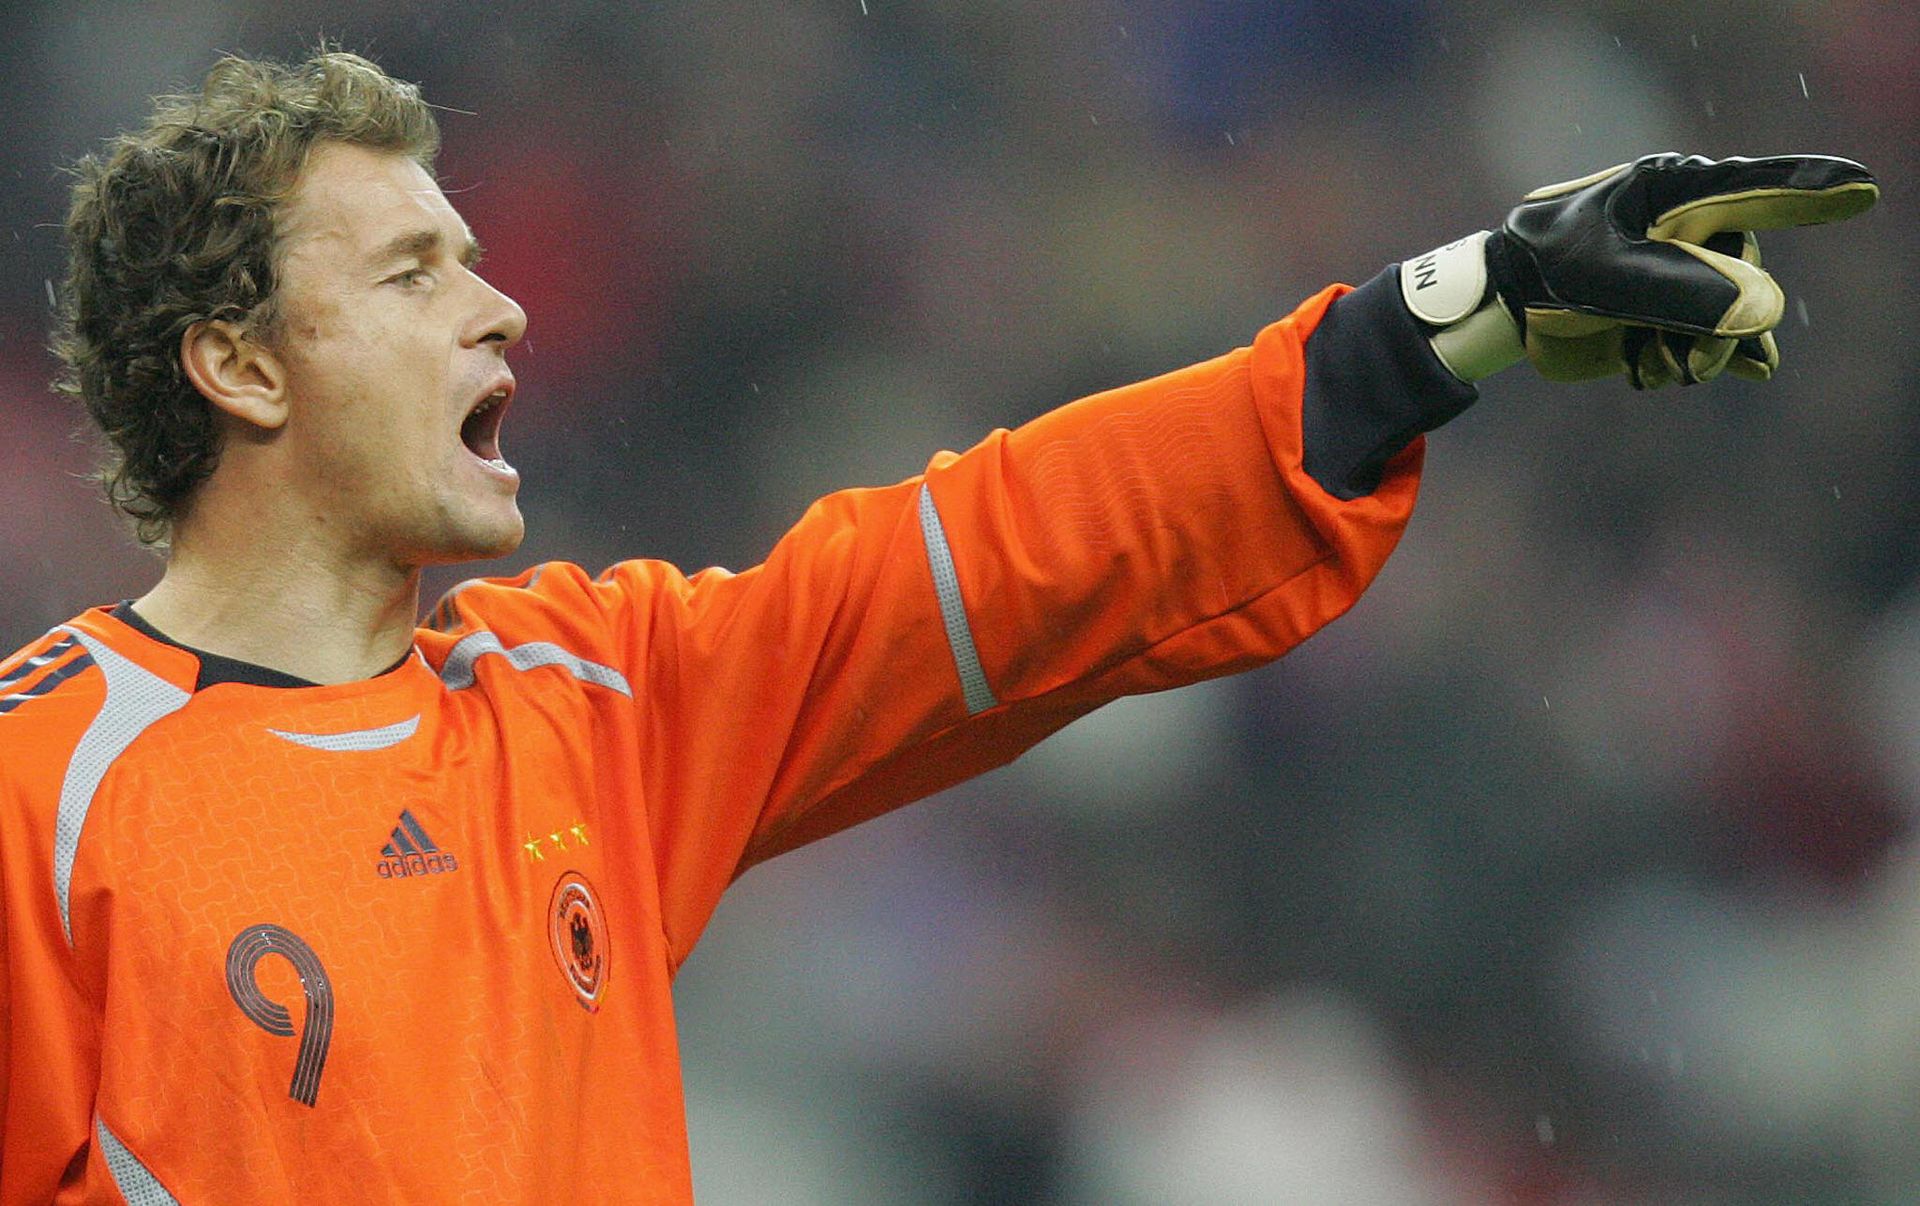 <p>                     Jens Lehmann replaced two legends for club and country in David Seaman and Oliver Kahn – and he was an outstanding goalkeeper in his own right.                   </p>                                      <p>                     Lehmann was between the sticks for the Gunners in their Invincible Premier League season in 2003/04, after signing for Borussia Dortmund, and was first choice for Germany as they reached the World Cup semi-finals in 2006. In the penalty shootout against Argentina in the last eight, Lehmann went the right way every time and saved two. He also made several spectacular saves against Italy in the semi-finals.                   </p>